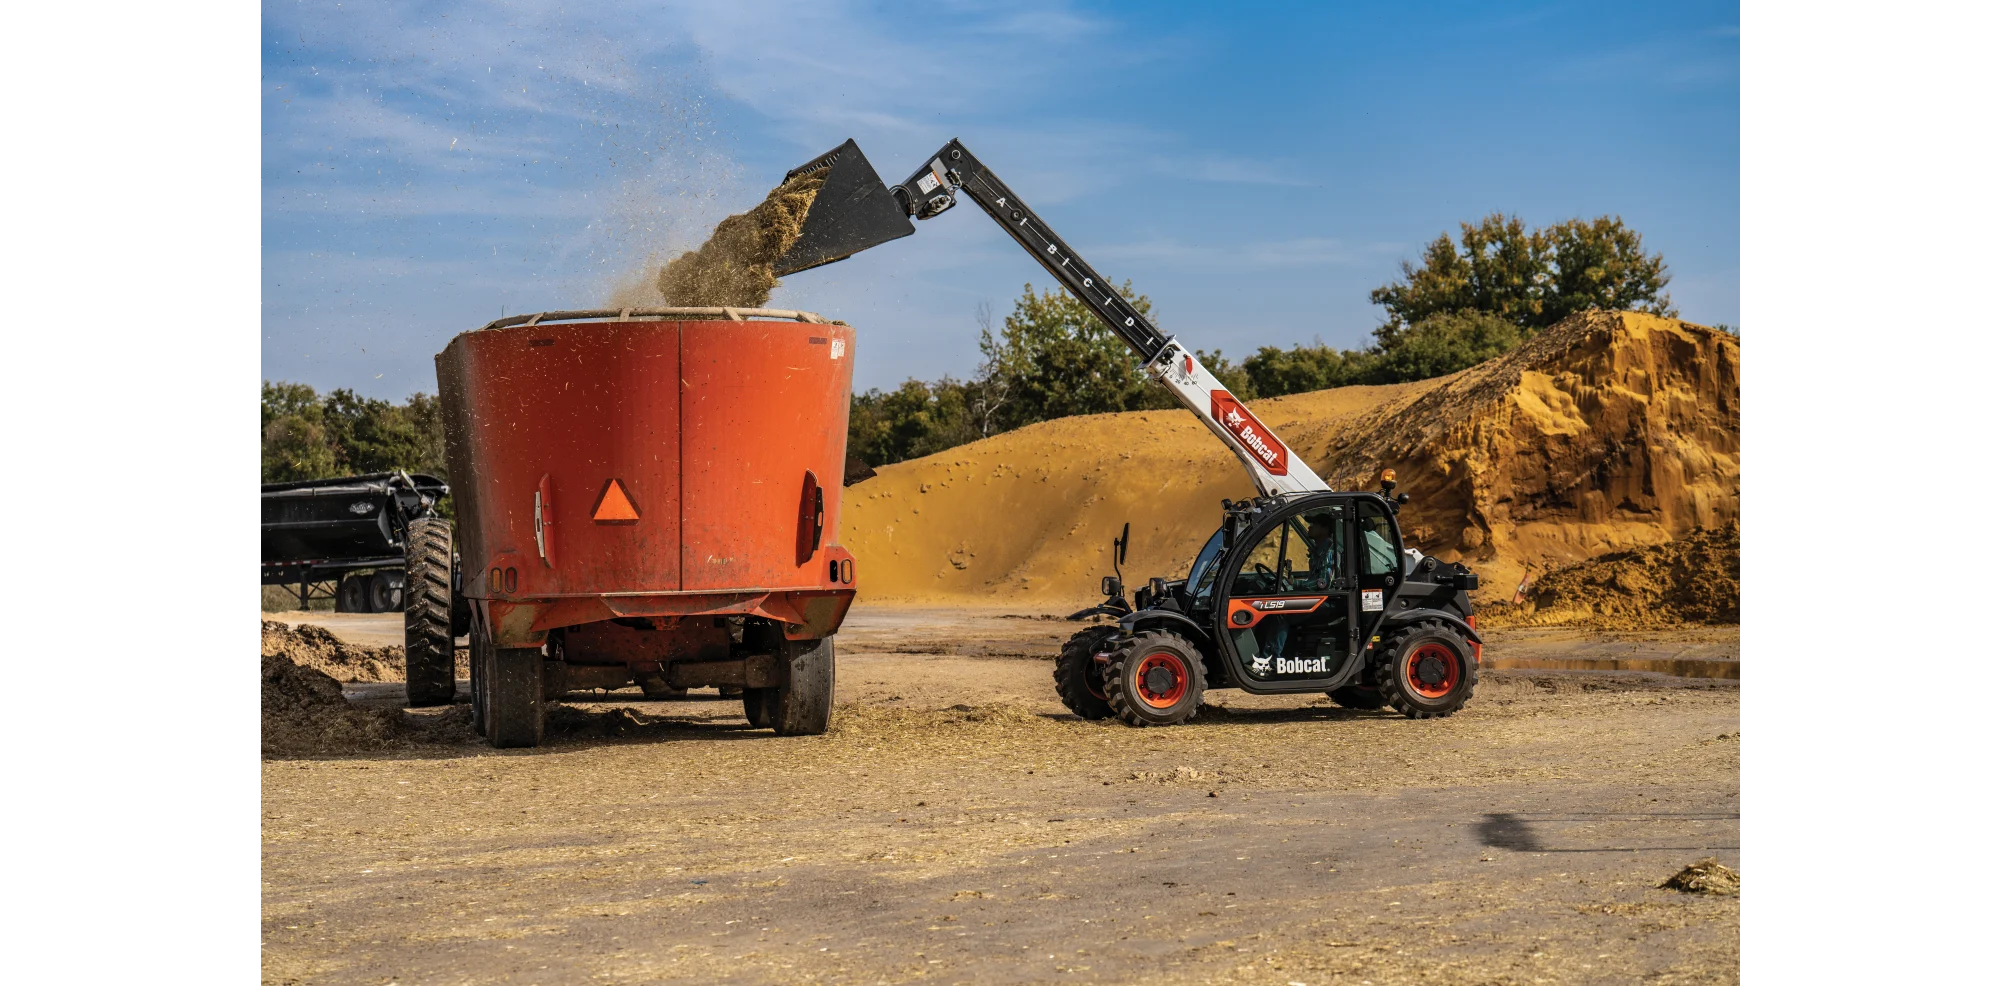 Browse Specs and more for the TL519 Telehandler - K.C. Bobcat